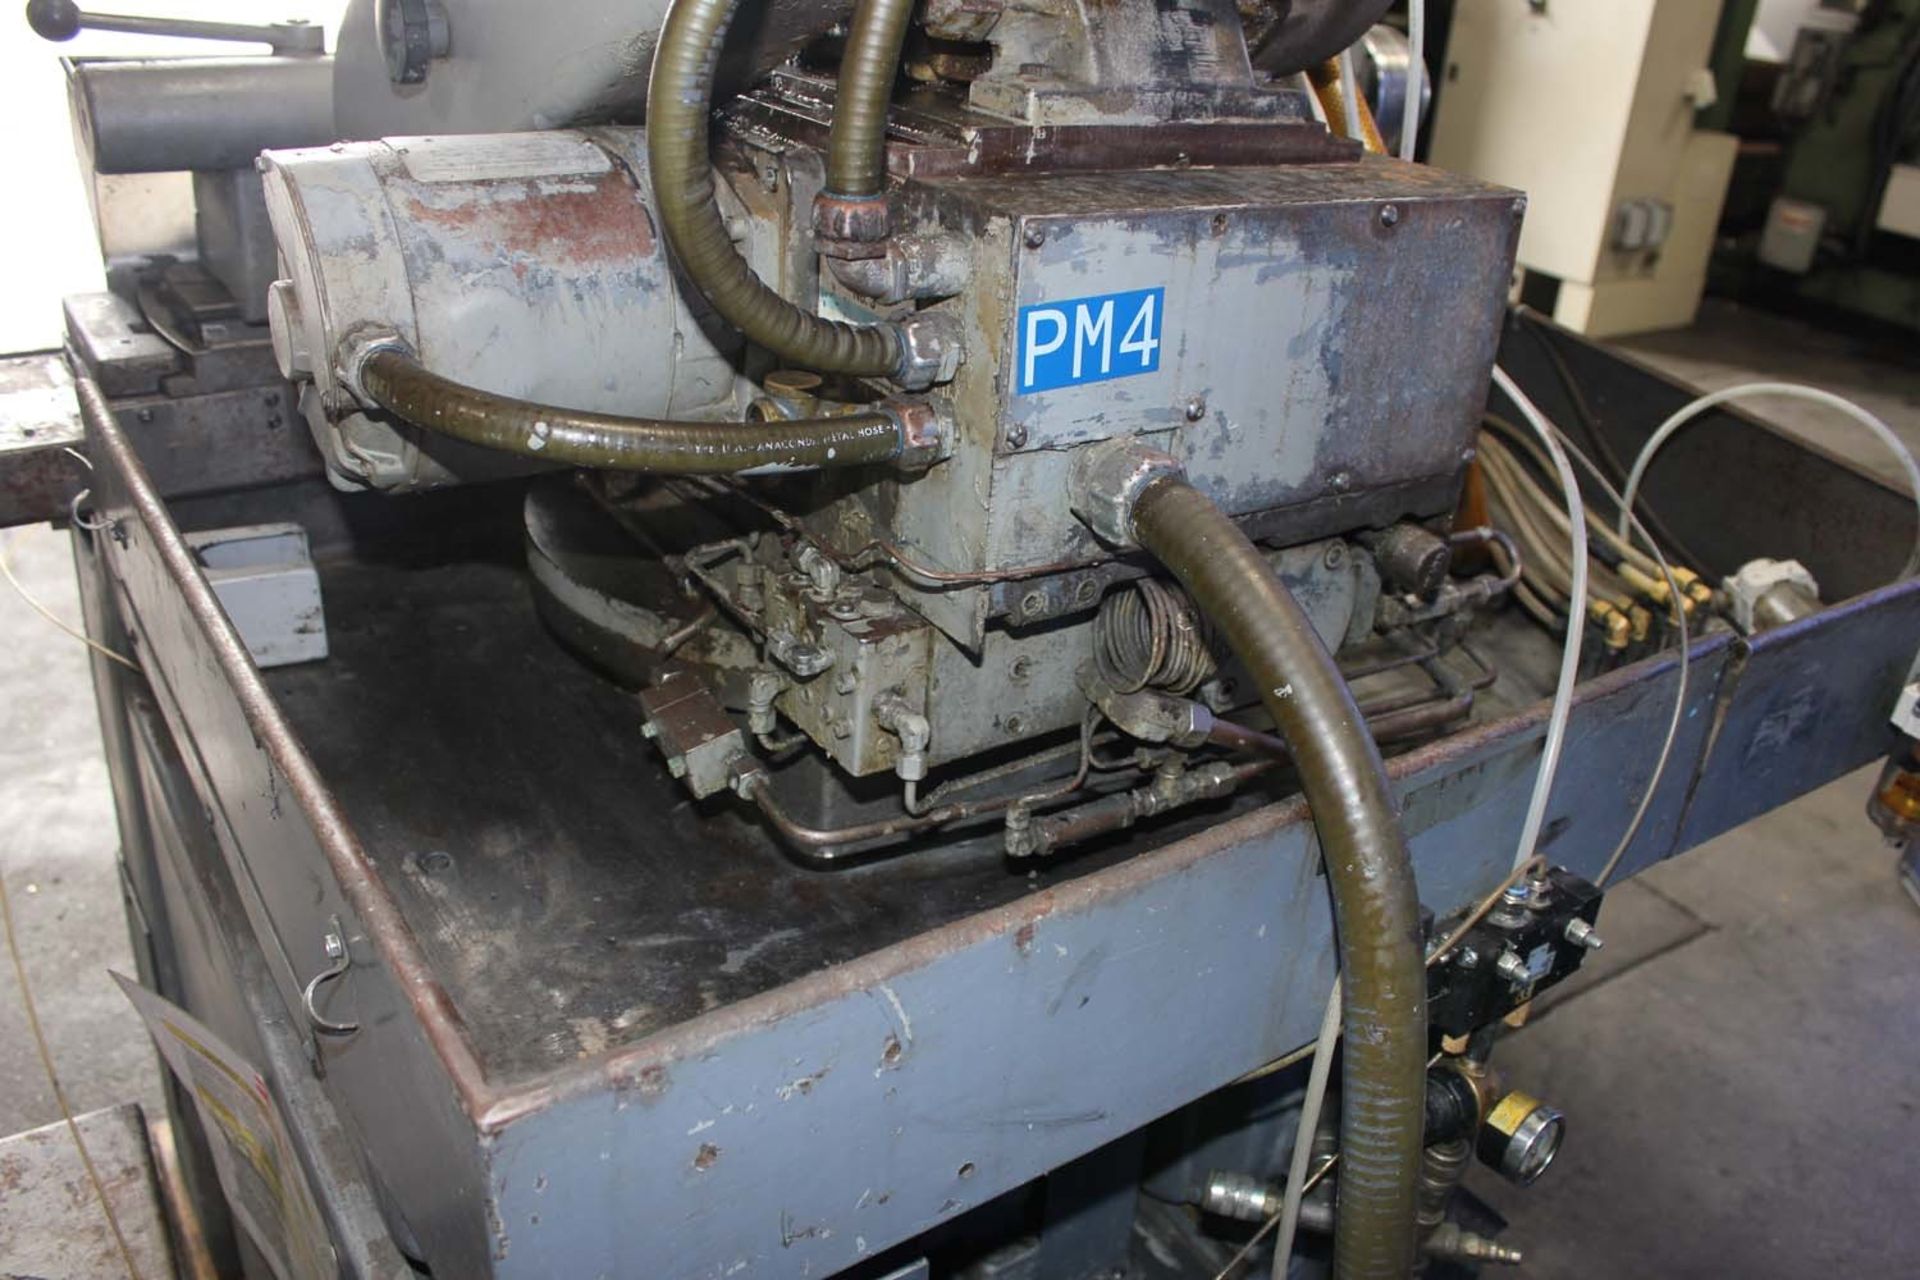 10" Swing x 20" Center Landis 1R Universal Cylindrical OD Grinder - Located In: Huntington Park, - Image 16 of 17